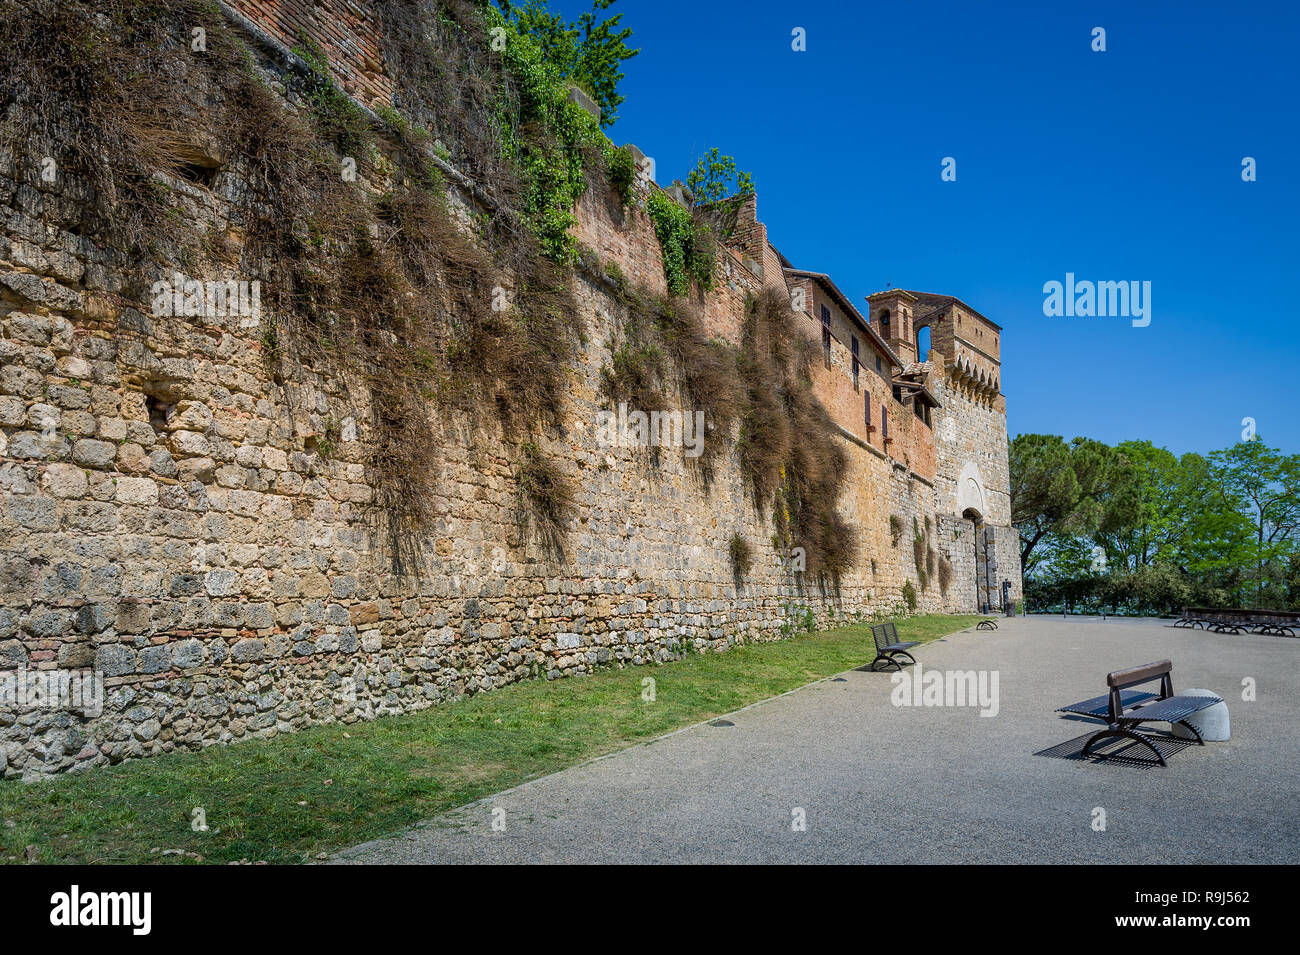 Entrance wall of San Gimignano medieval fortress. Historical attractions of Toscana region, Italy. Stock Photo